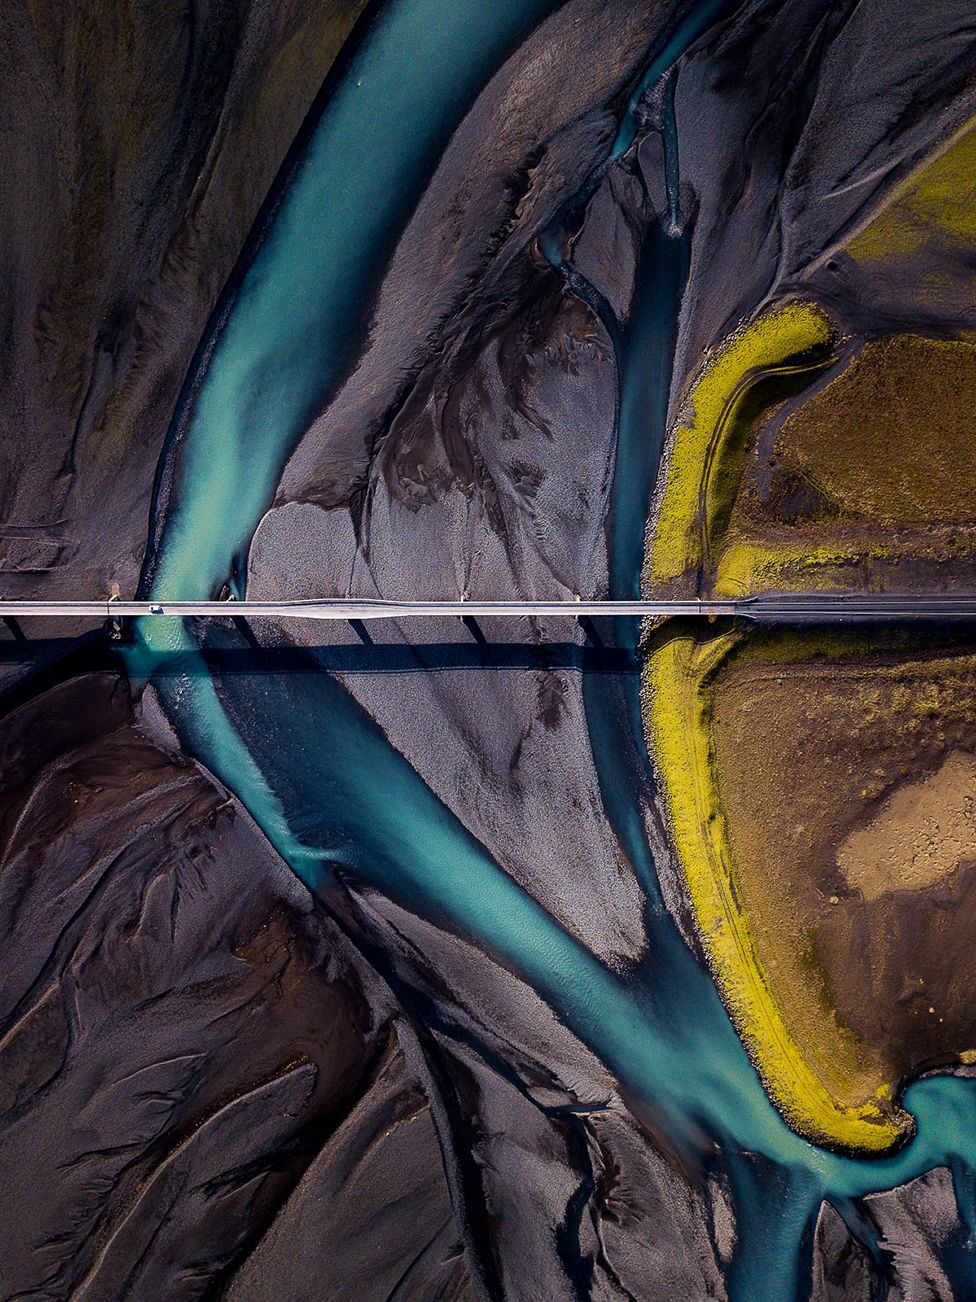 An aerial view of the ground showing dark sand with a blue river cutting through it